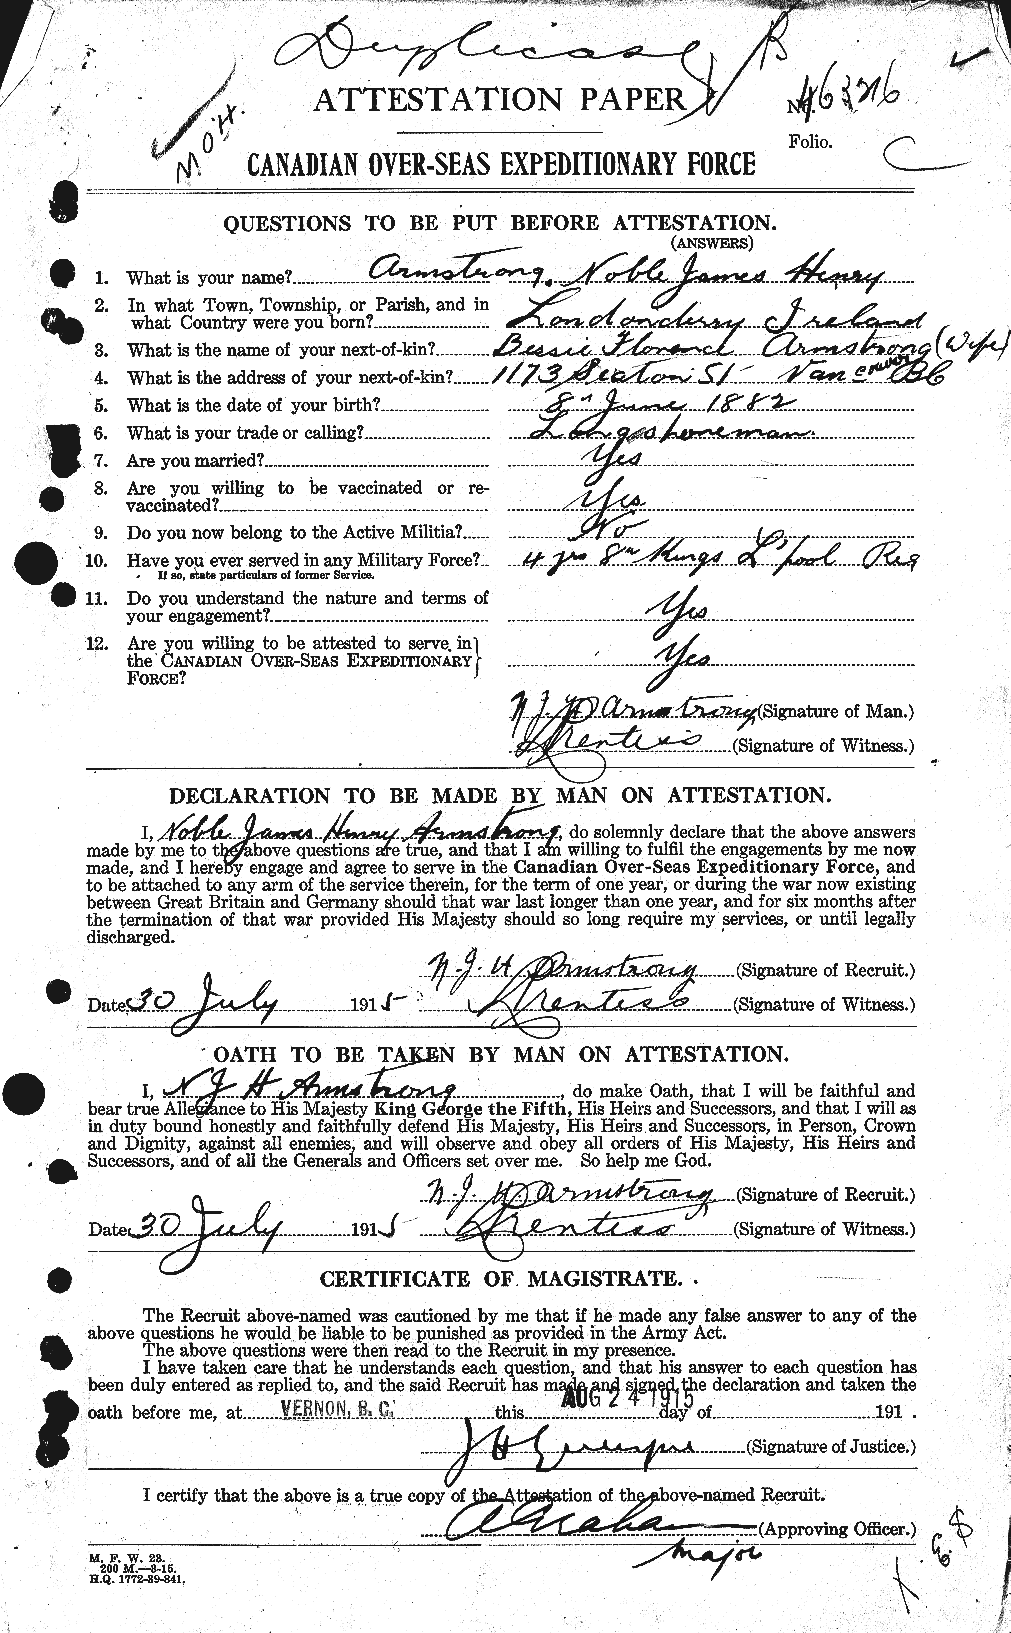 Personnel Records of the First World War - CEF 212737a